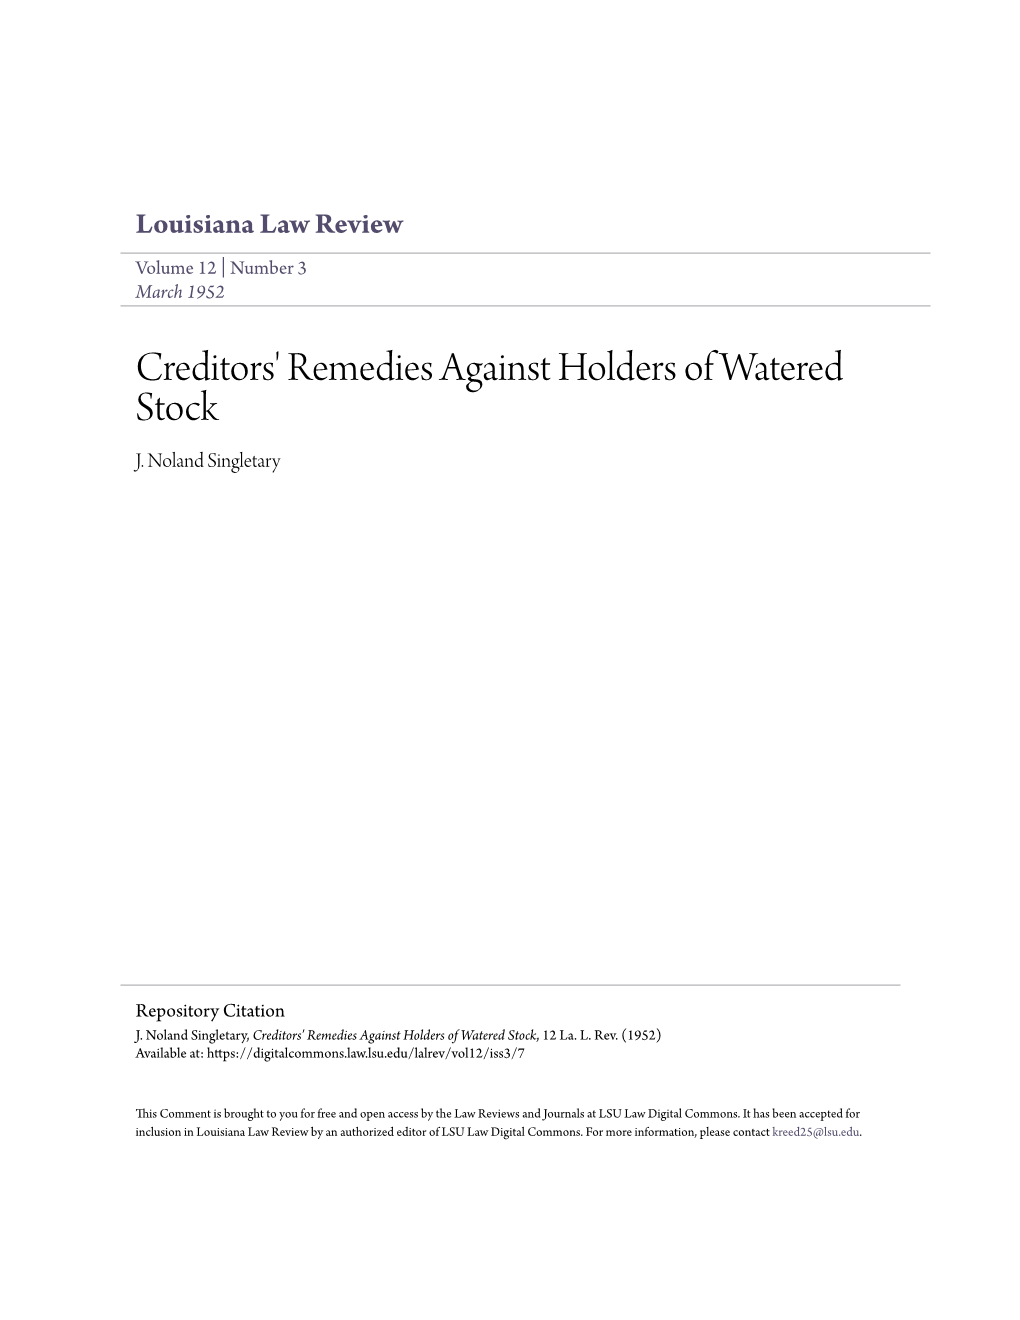 Creditors' Remedies Against Holders of Watered Stock J